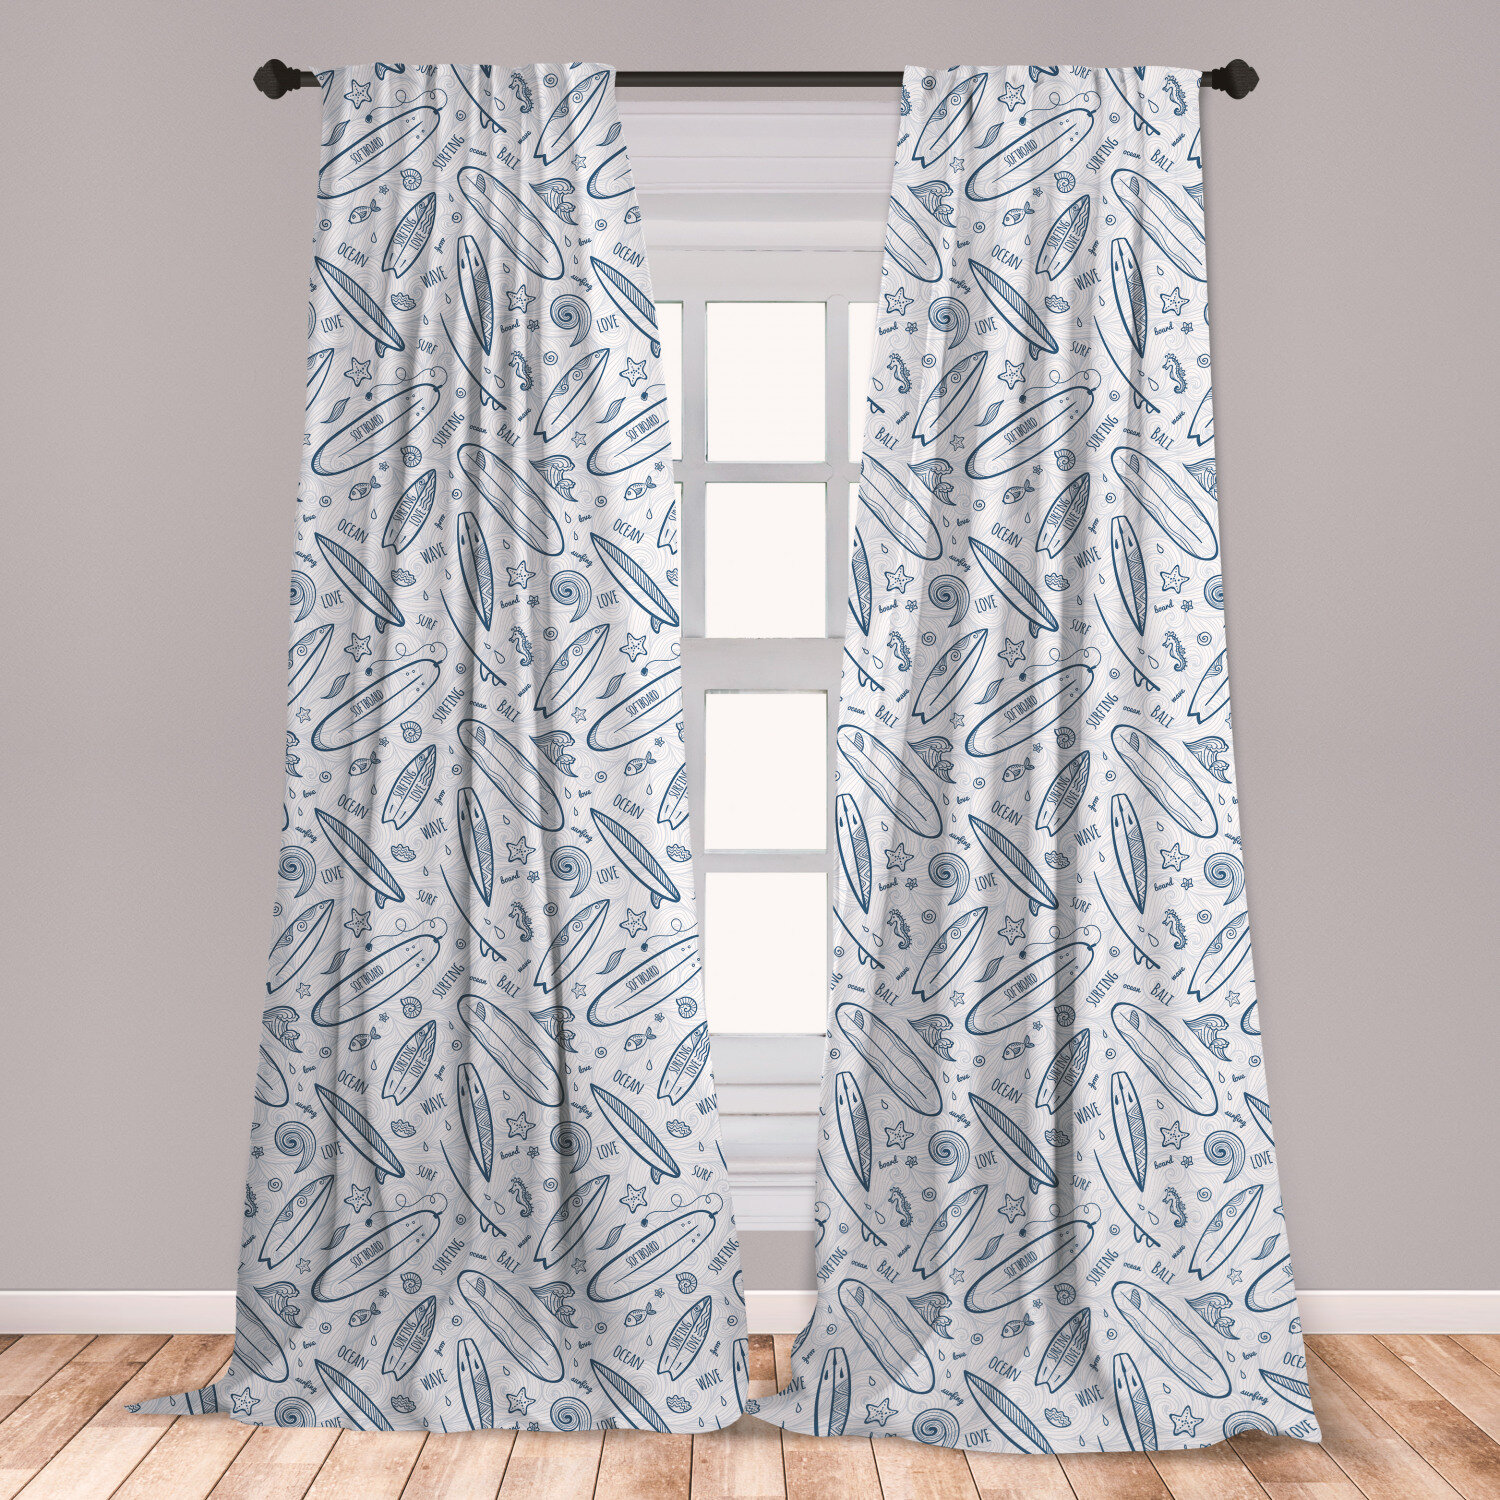 East Urban Home Ambesonne Surfboard 2 Panel Curtain Set Doodle